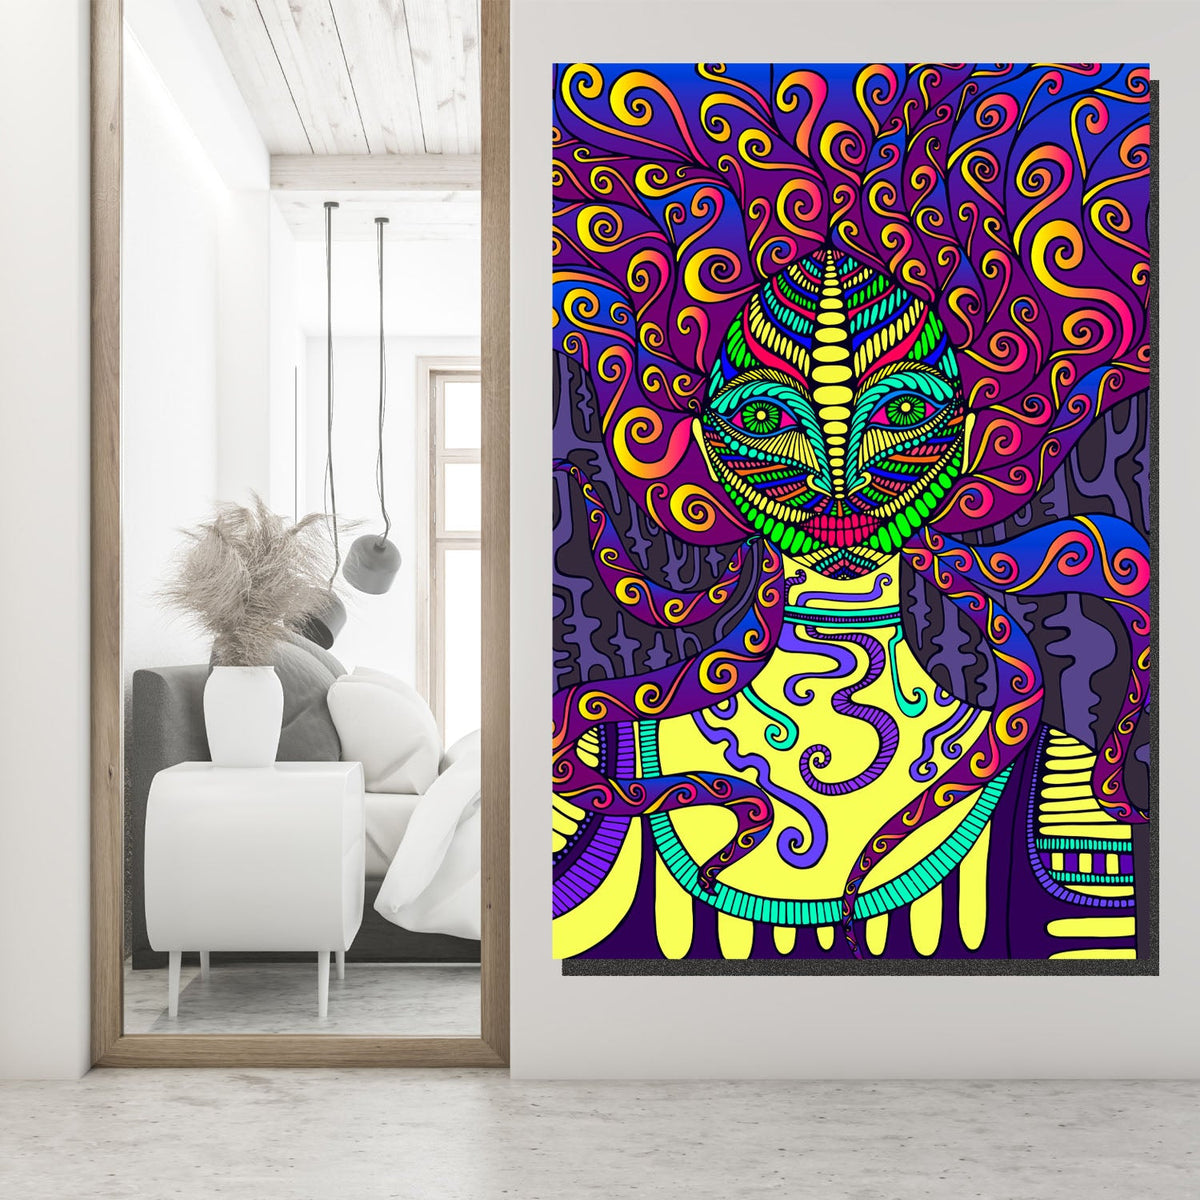 https://cdn.shopify.com/s/files/1/0387/9986/8044/products/PsychedelicWomanCanvasArtprintStretched-2.jpg